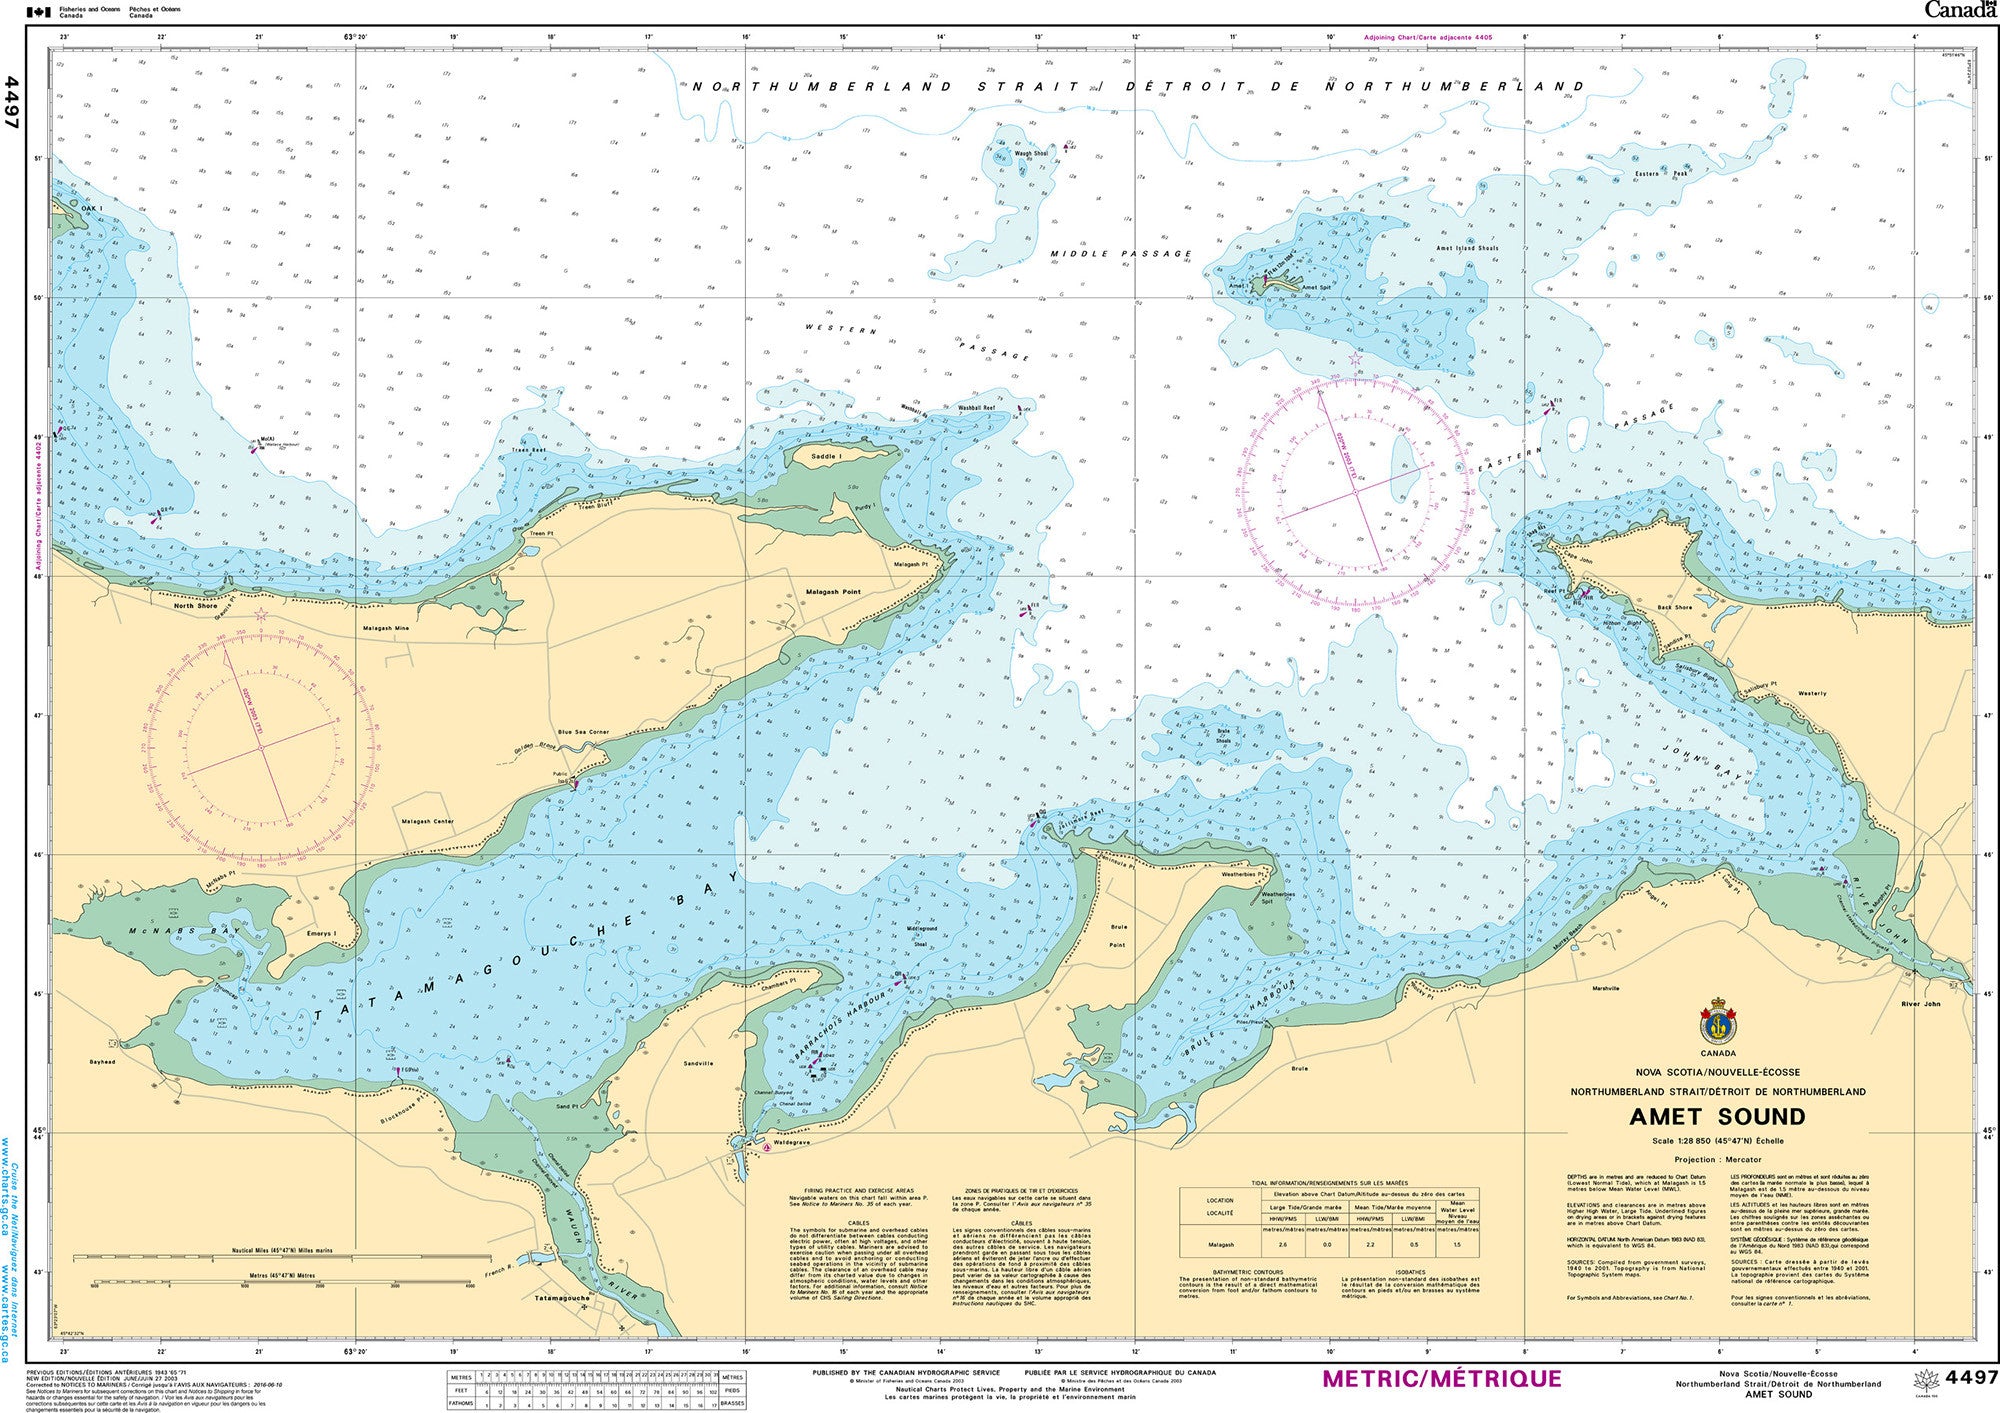 Canadian Hydrographic Service Nautical Chart CHS4497: Amet Sound